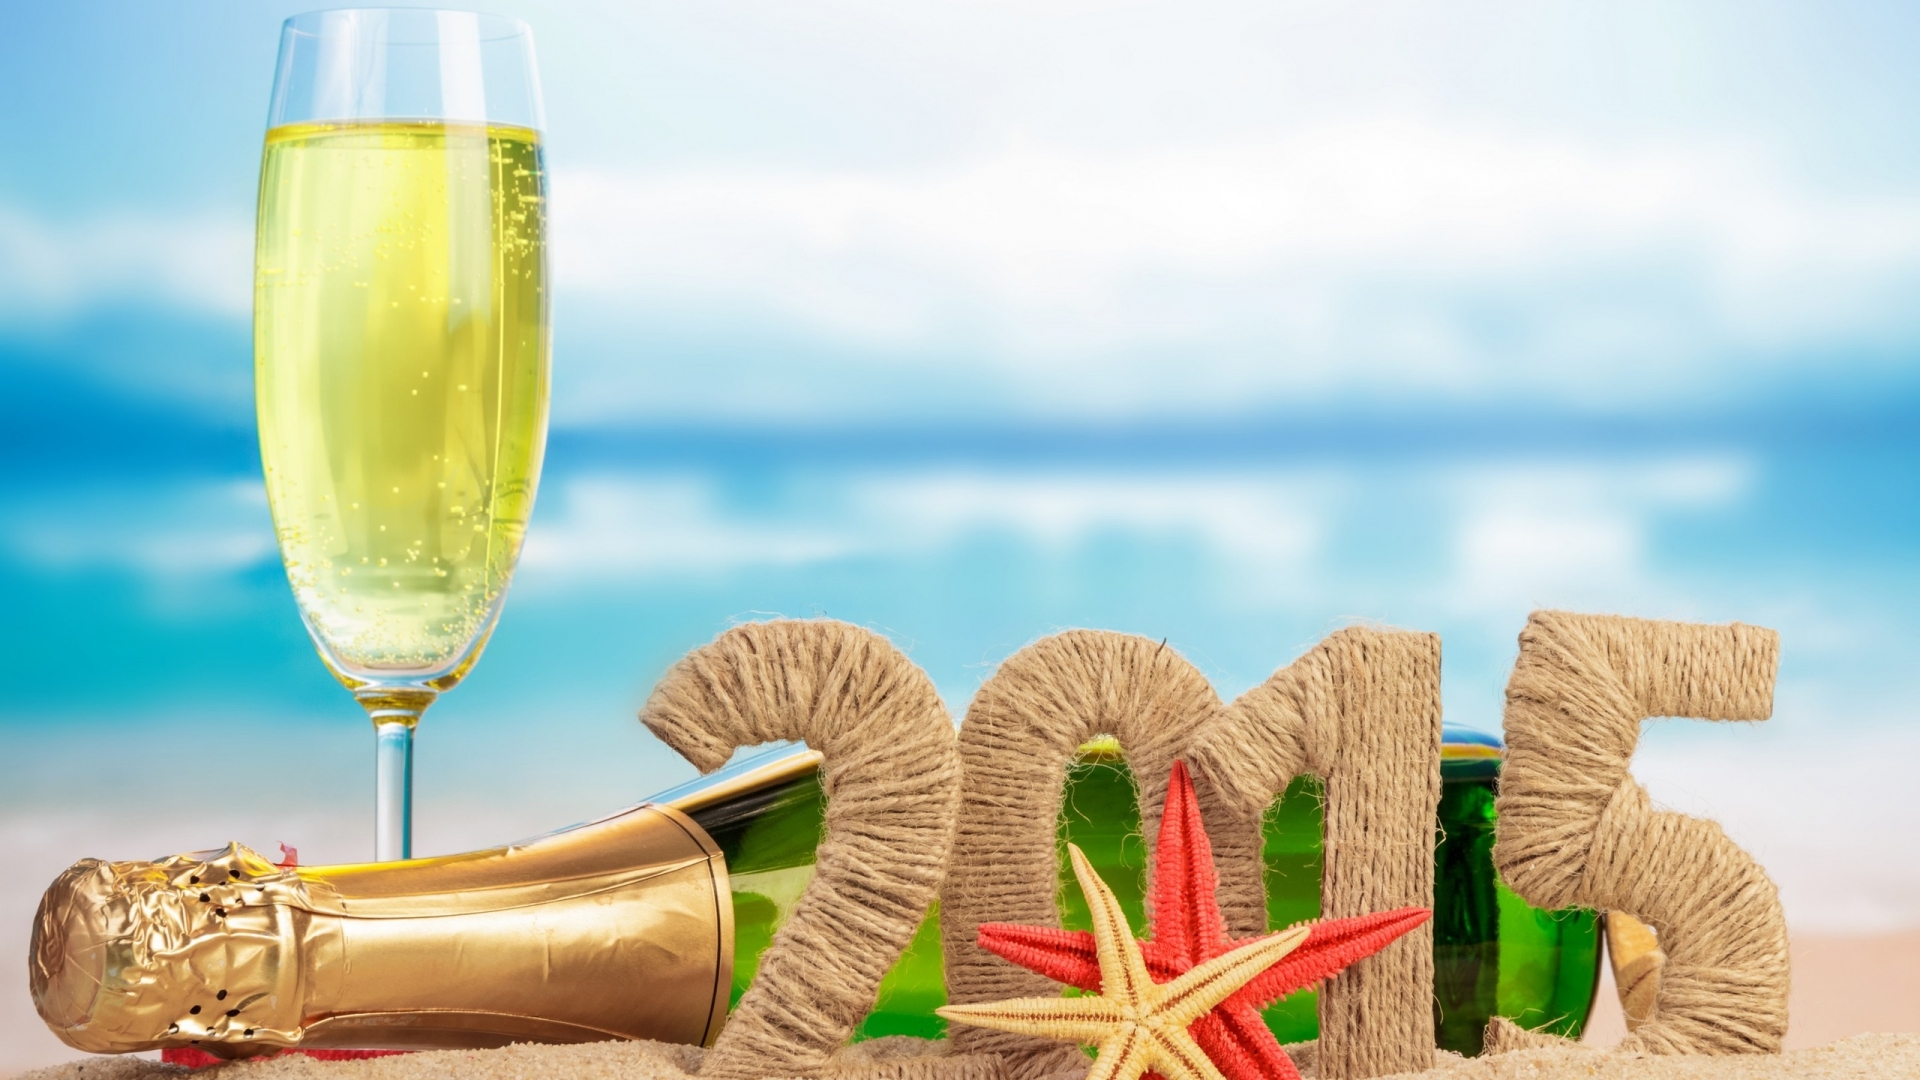 2015 Ornaments and Champagne for 1920 x 1080 HDTV 1080p resolution